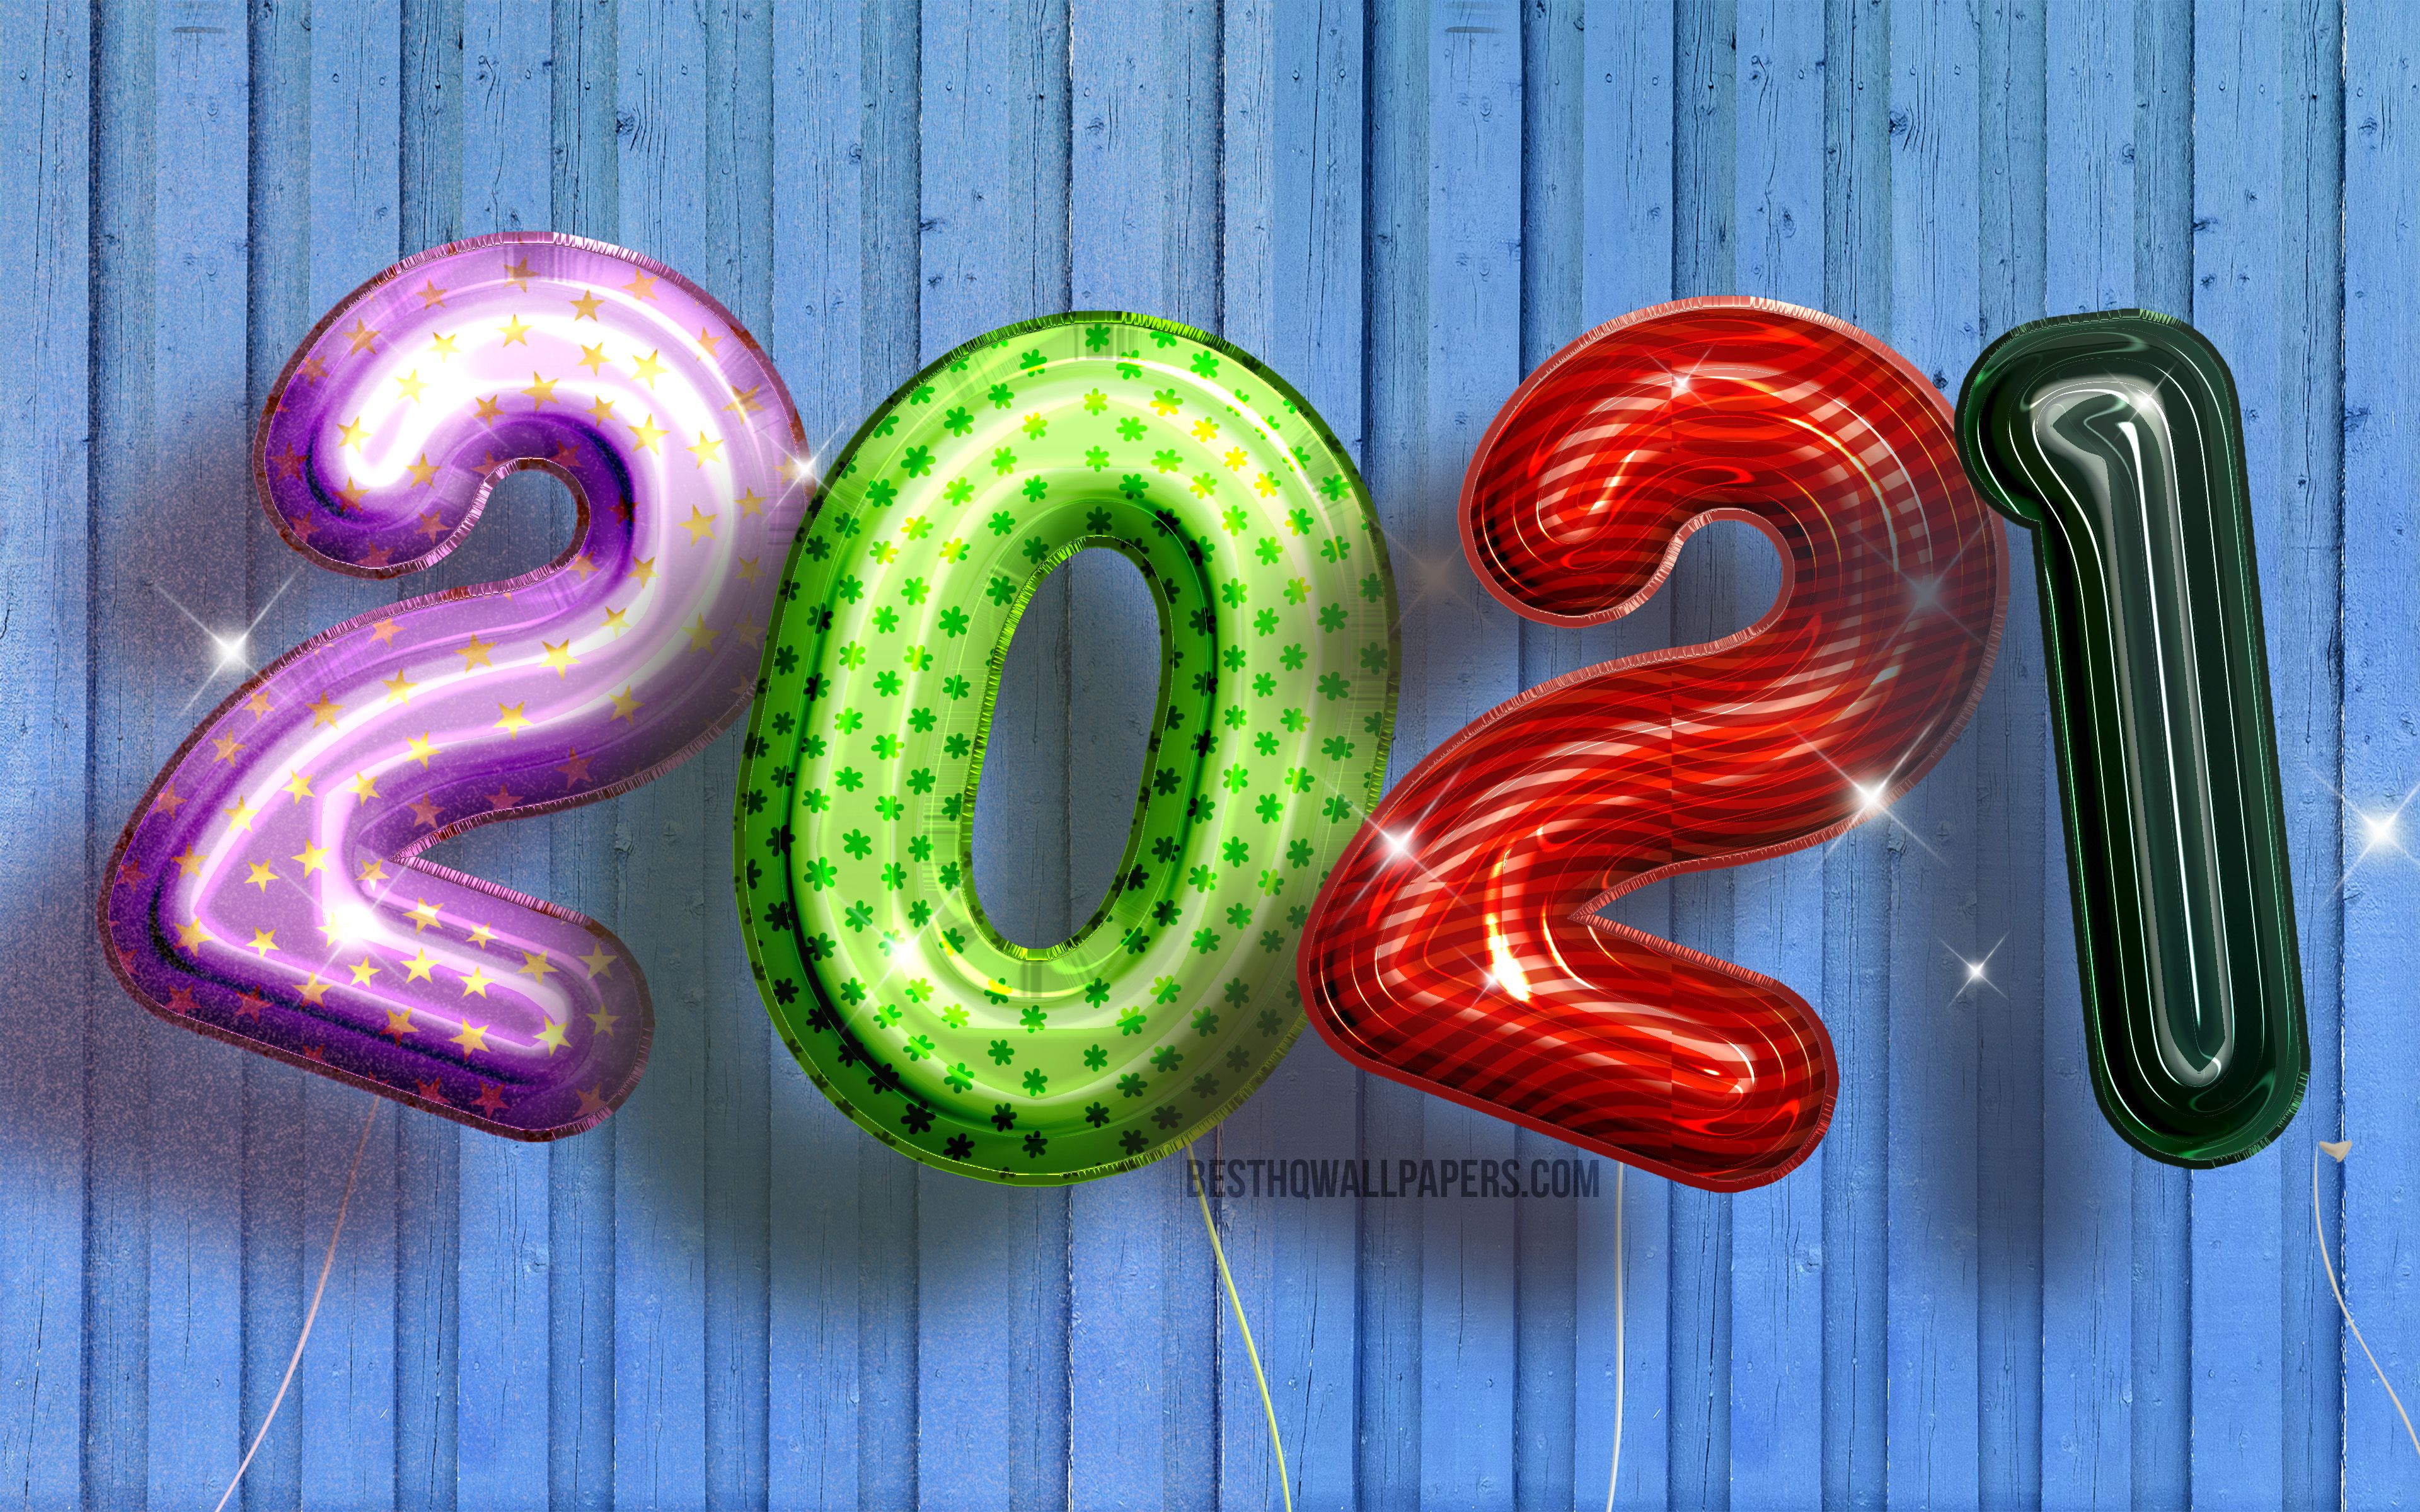 Download wallpaper 4k, Happy New Year colorful realistic balloons, 2021 colorful digits, 2021 concepts, 2021 new year, 2021 on blue background, 2021 year digits, New Year 2021 for desktop with resolution 3840x2400. High Quality HD picture